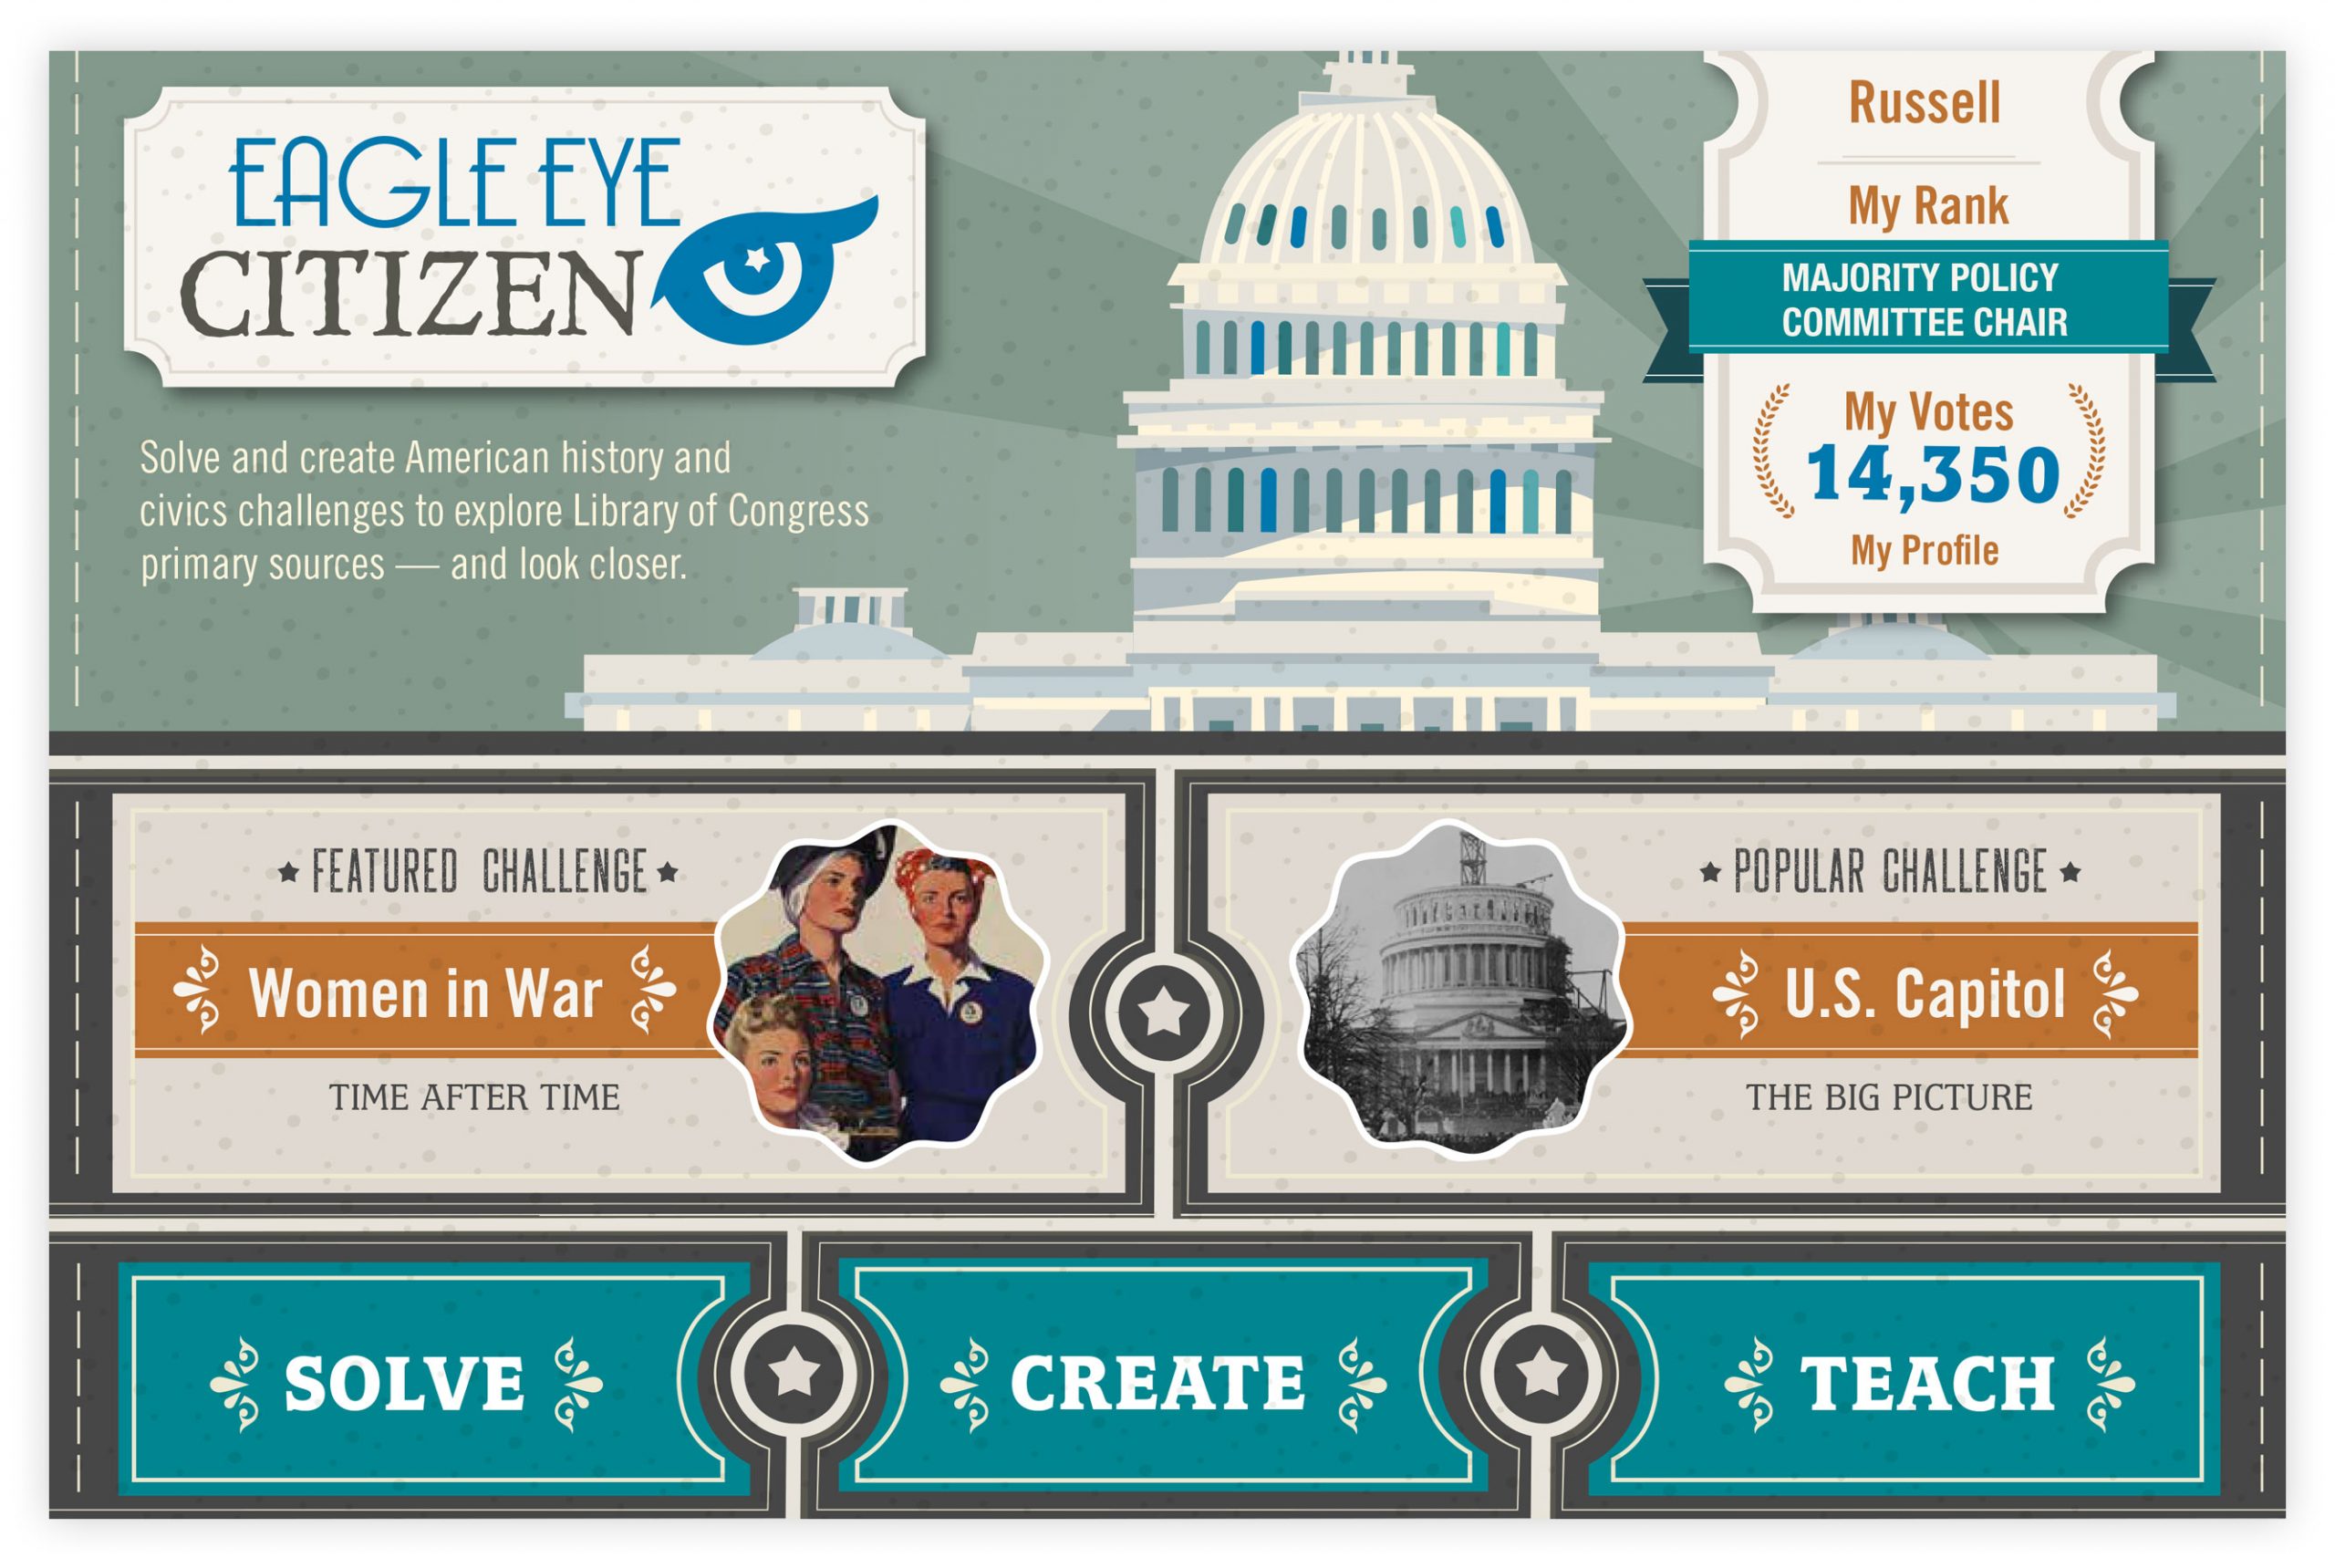 Screengrab of the Eagle Eye Citizen website landing page.